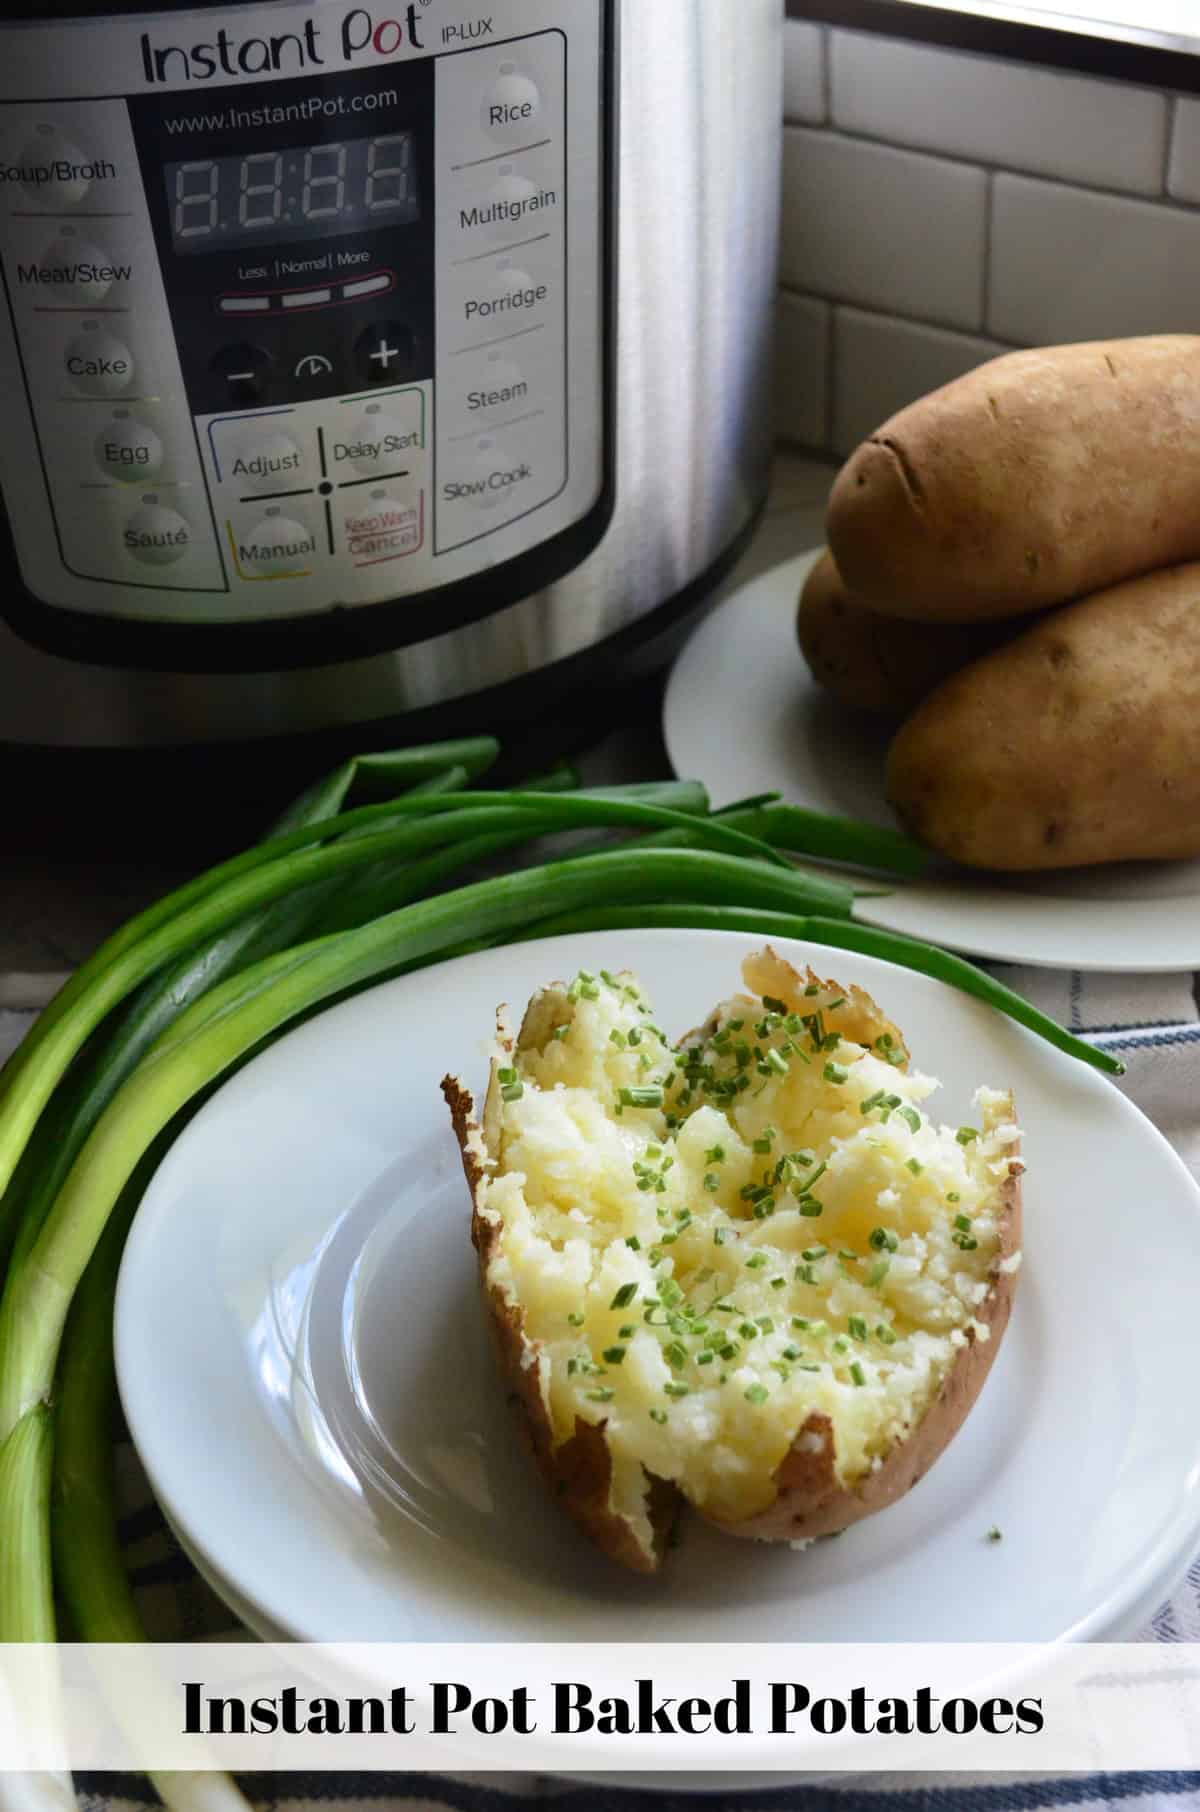 Plated baked potato topped with chives in front of whole chives and instant pot with title text.